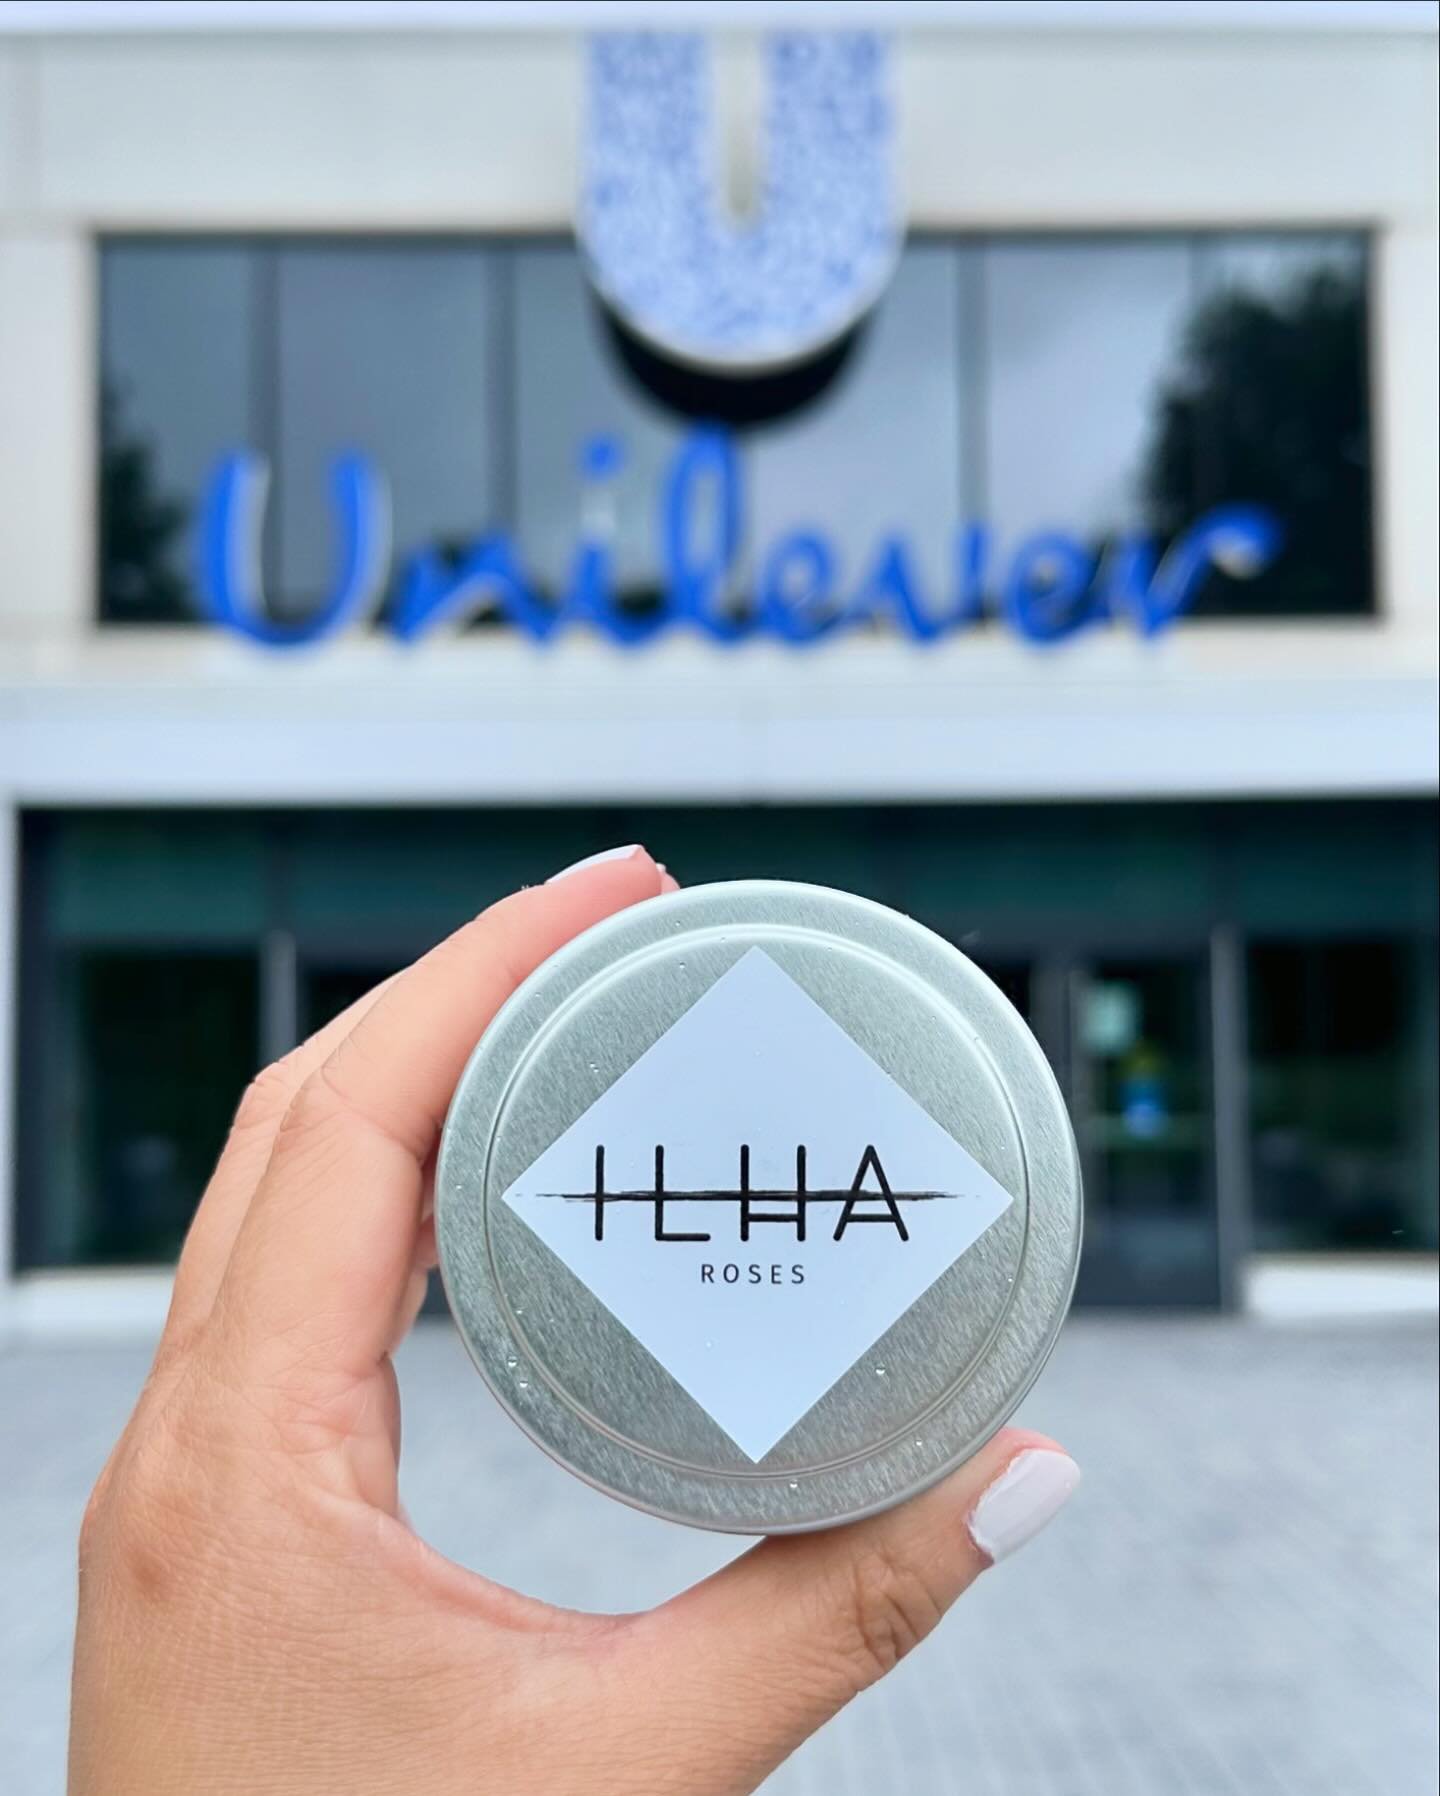 We popped up at Unilever earlier this week in support of AAPI month and to highlight fellow AAPI-owned small businesses, and we had a blast!! 

Thanks so much for having us, @unilever! ☺️ #ilhacandles